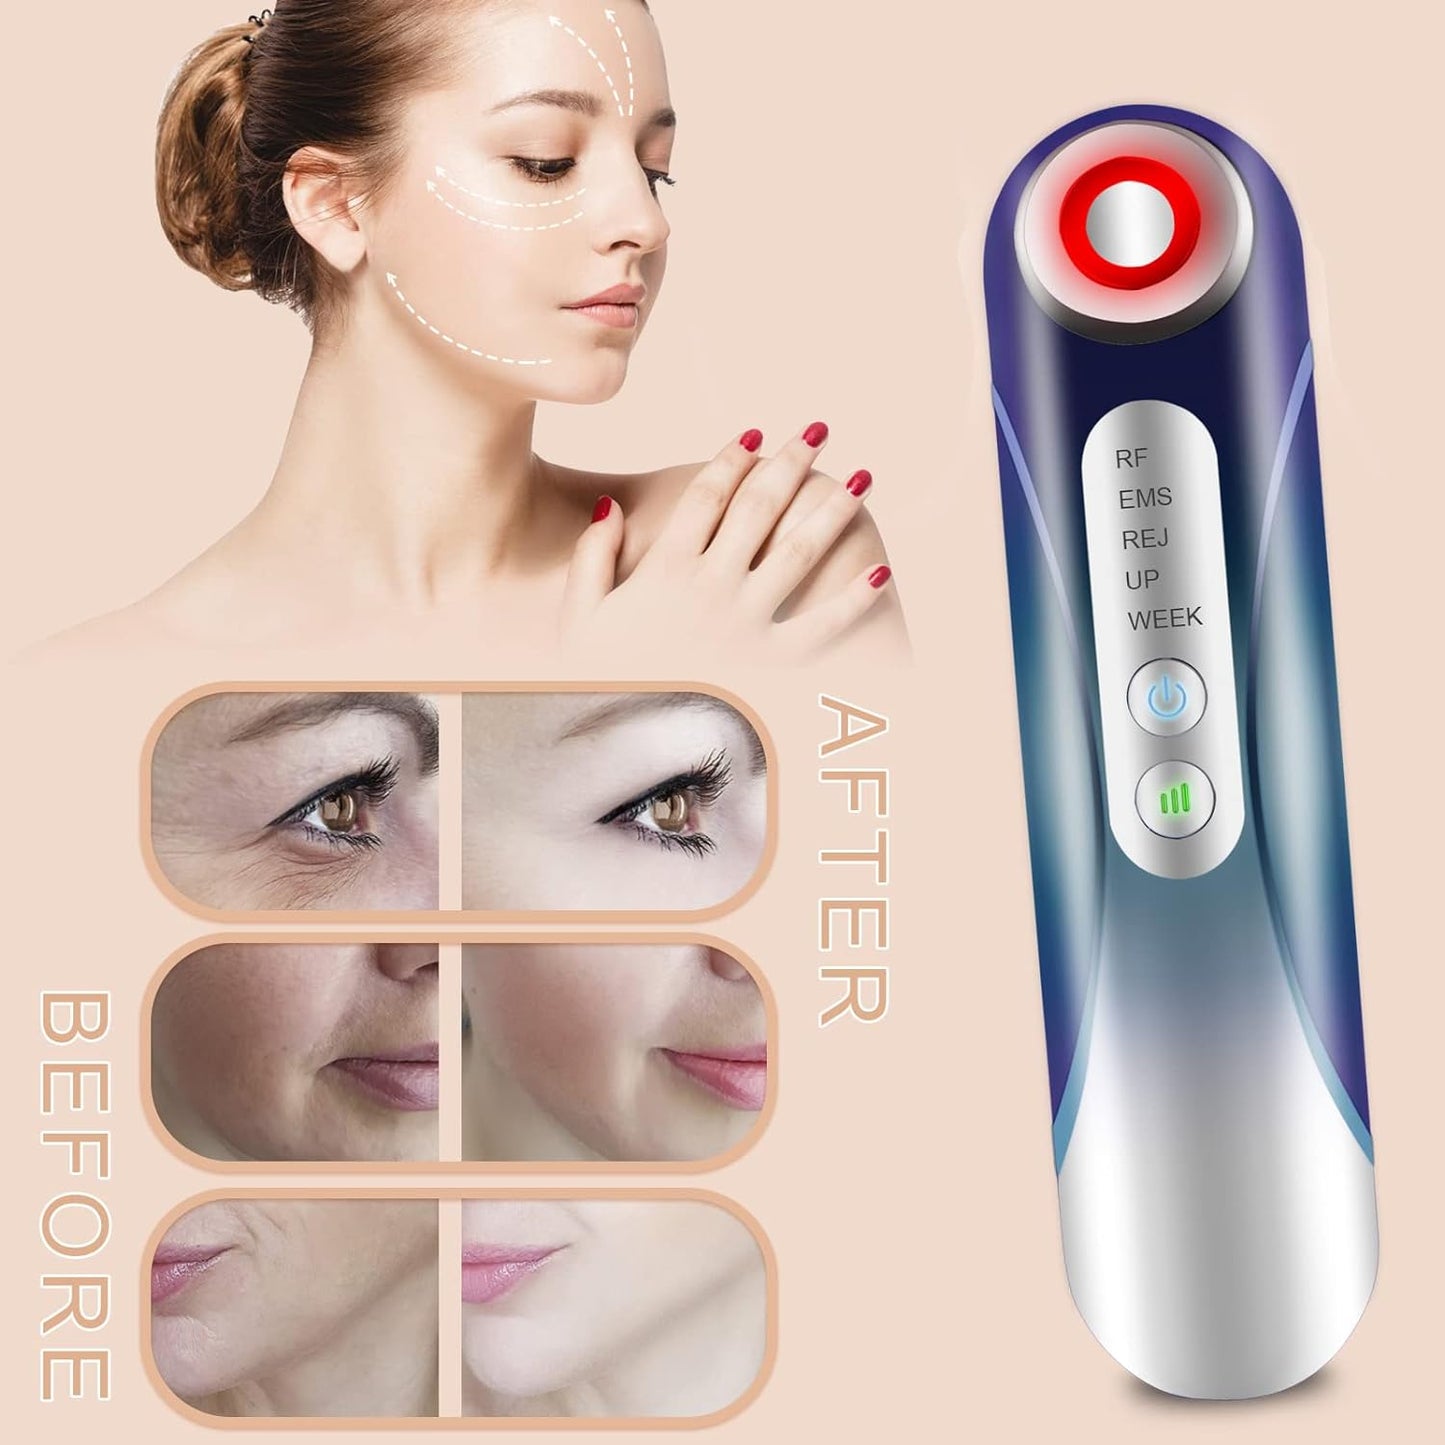 Home Anti-Aging Massage & Skin Tightening Device with Light Therapy, EMS and High Frequency